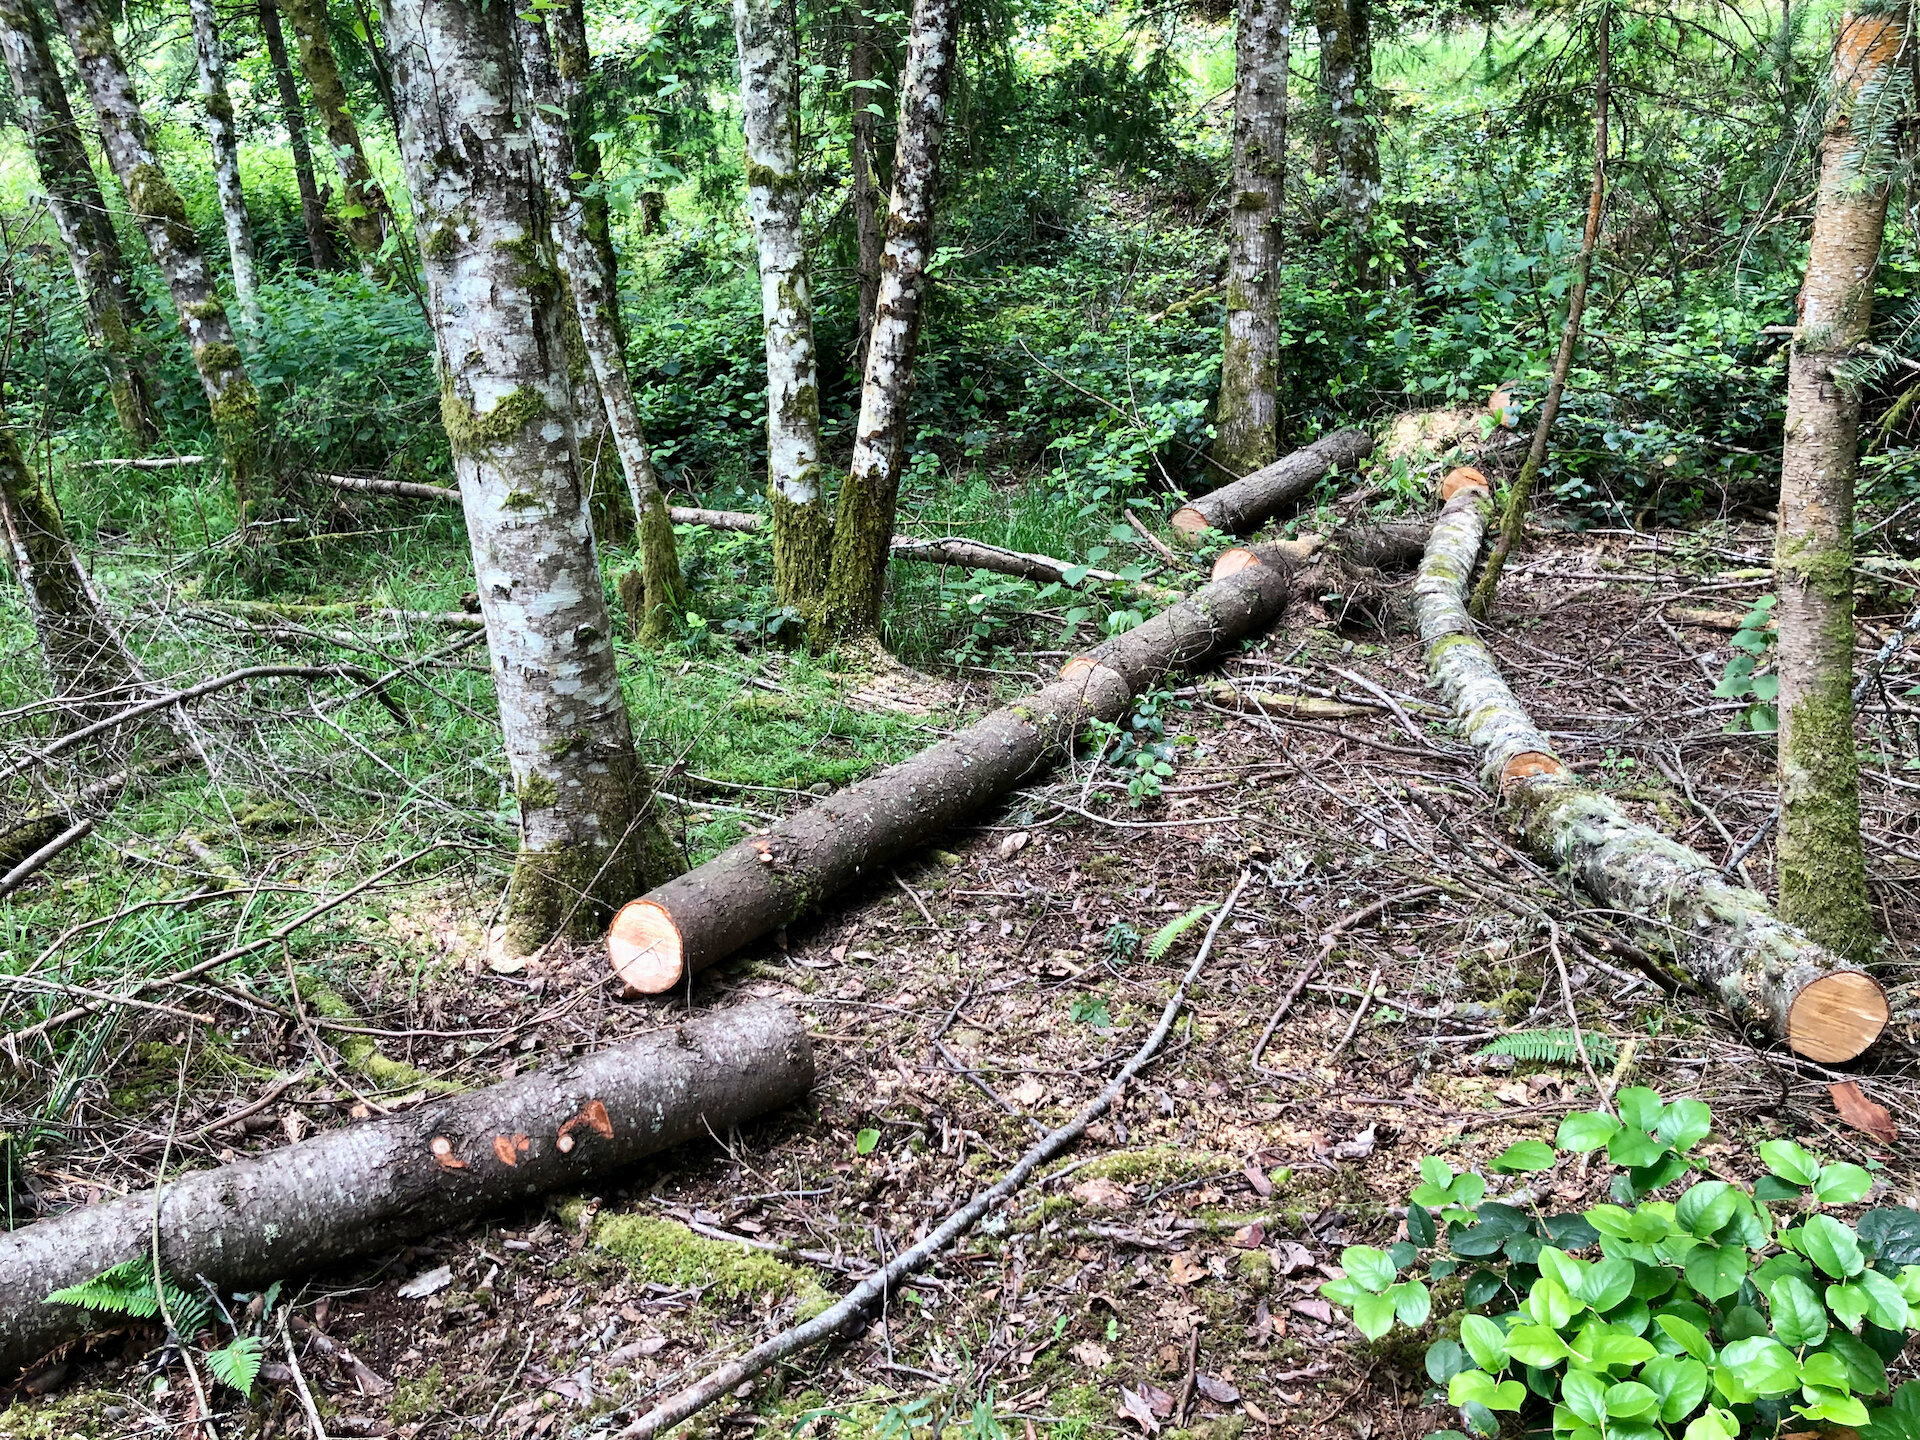  There were two fairly big trees that had come down in the forest - one alder and one fir. I cut them up into pieces that were small enough to move. 